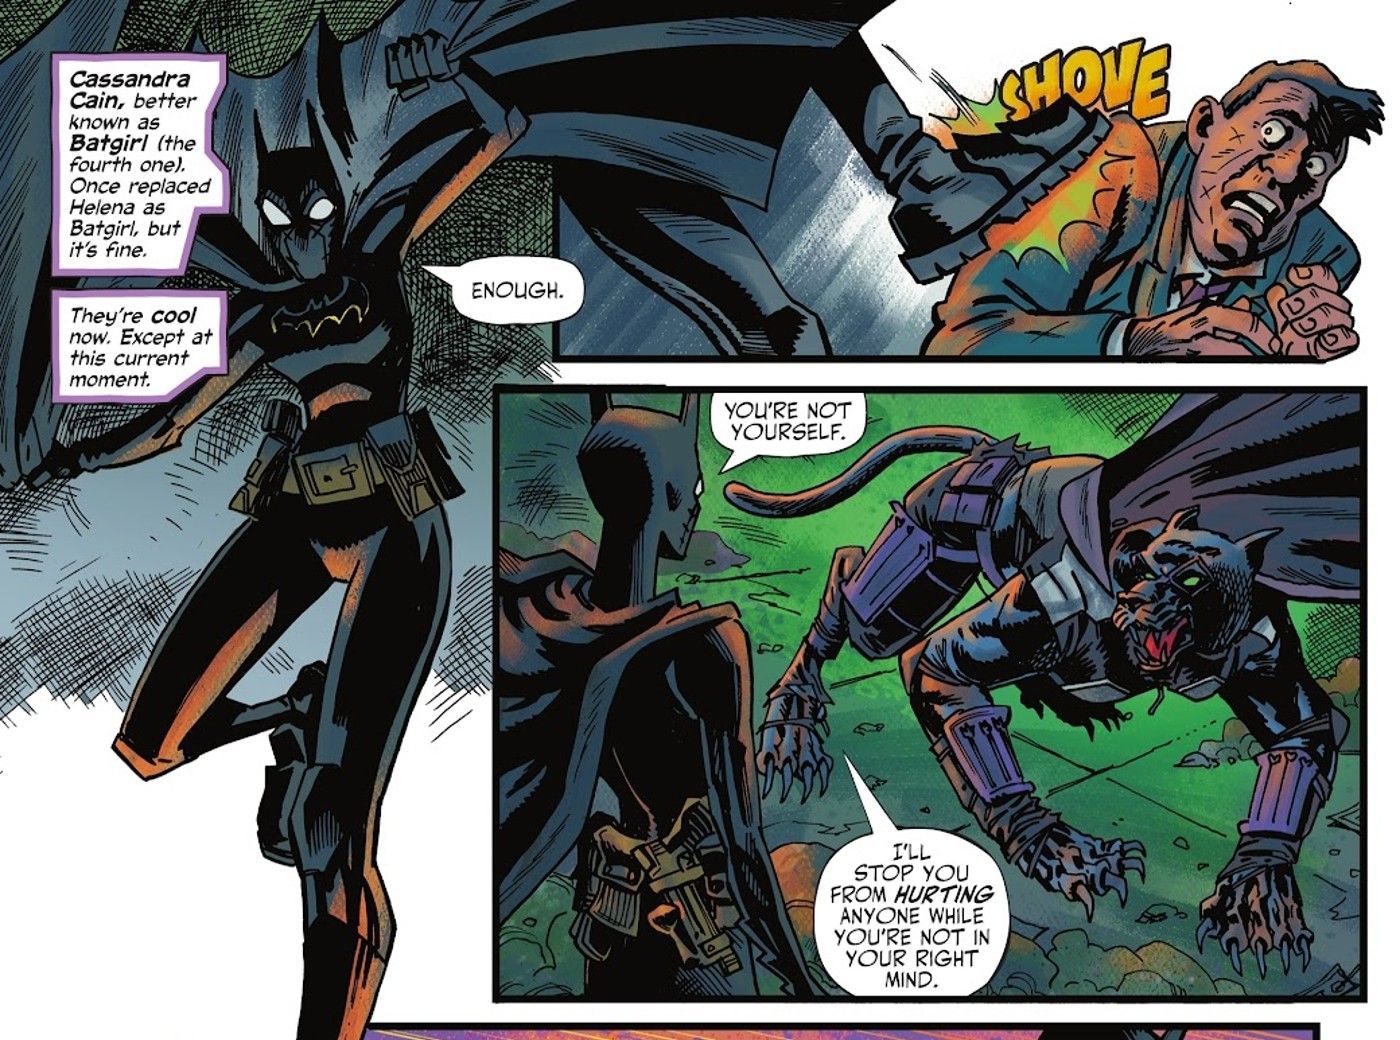 After 25 Years, DC’s Forgotten Batgirl Finally Gets the Shout Out She Deserves